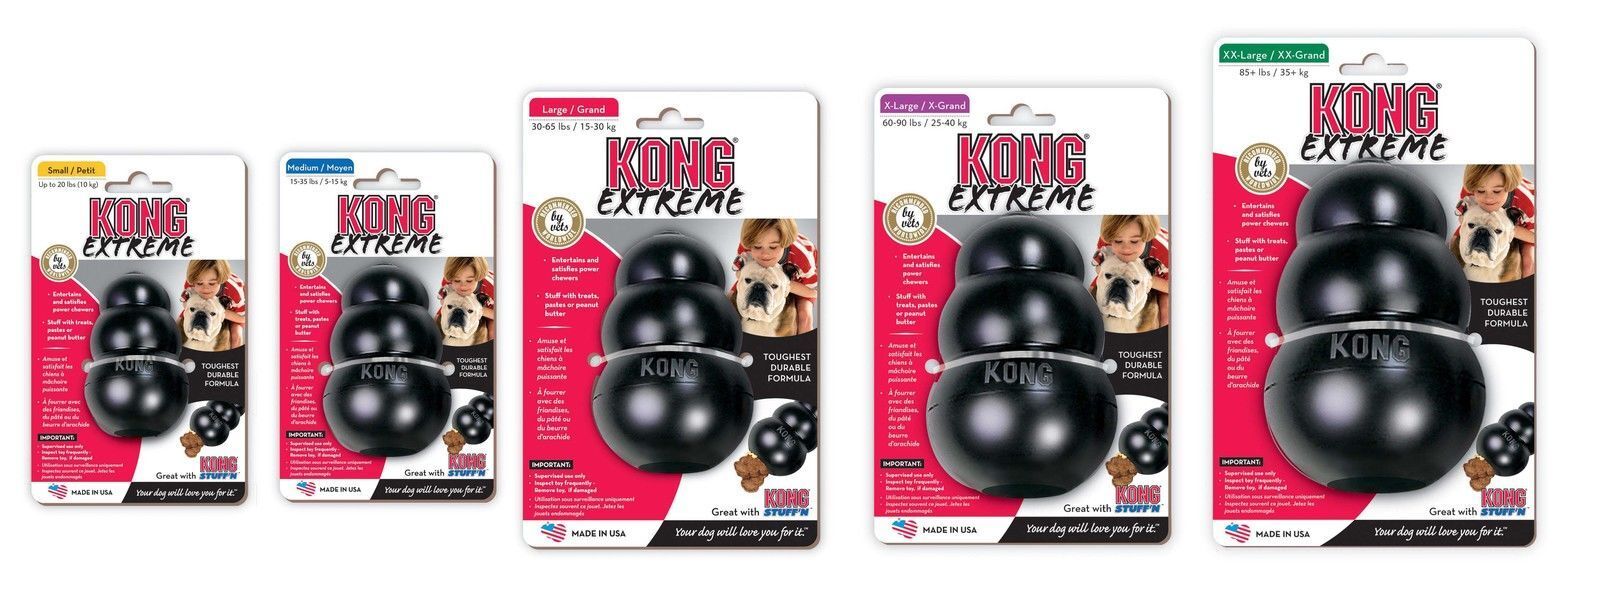 3 x KONG Classic Extreme Black Interactive Dog Toy - for Tough Dogs! - Large image 2